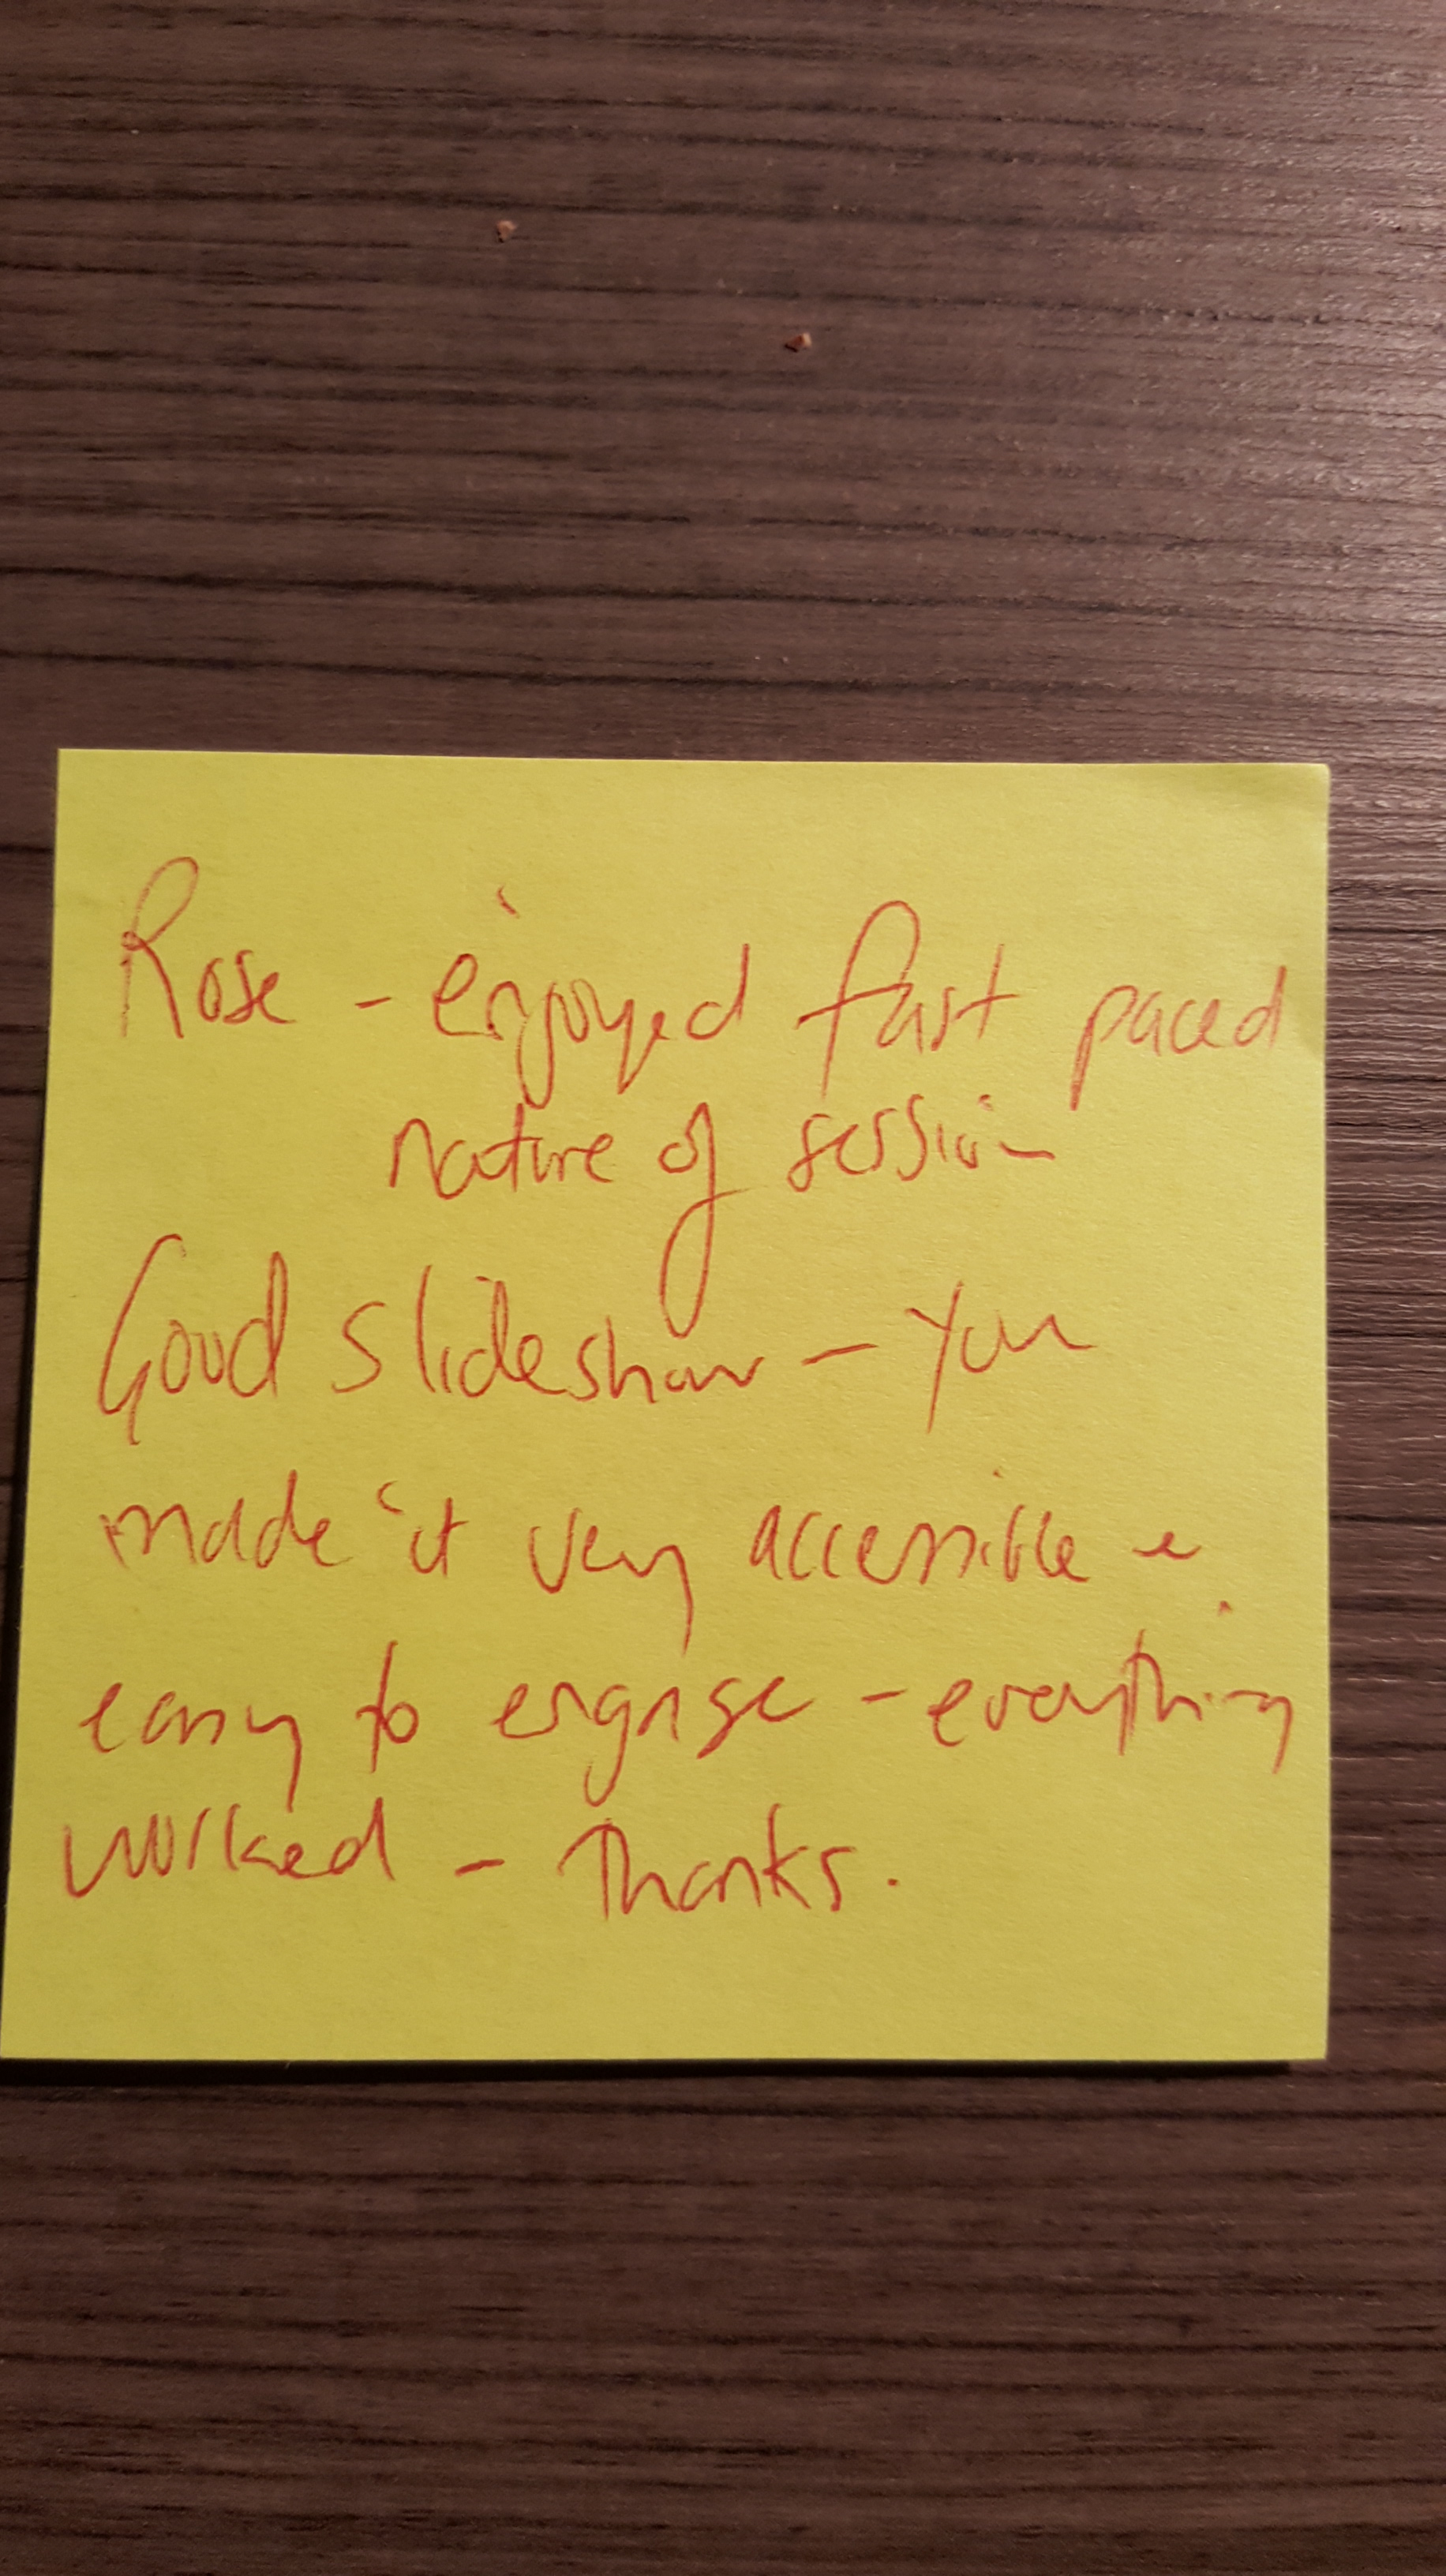 Post it note with positive feedback.